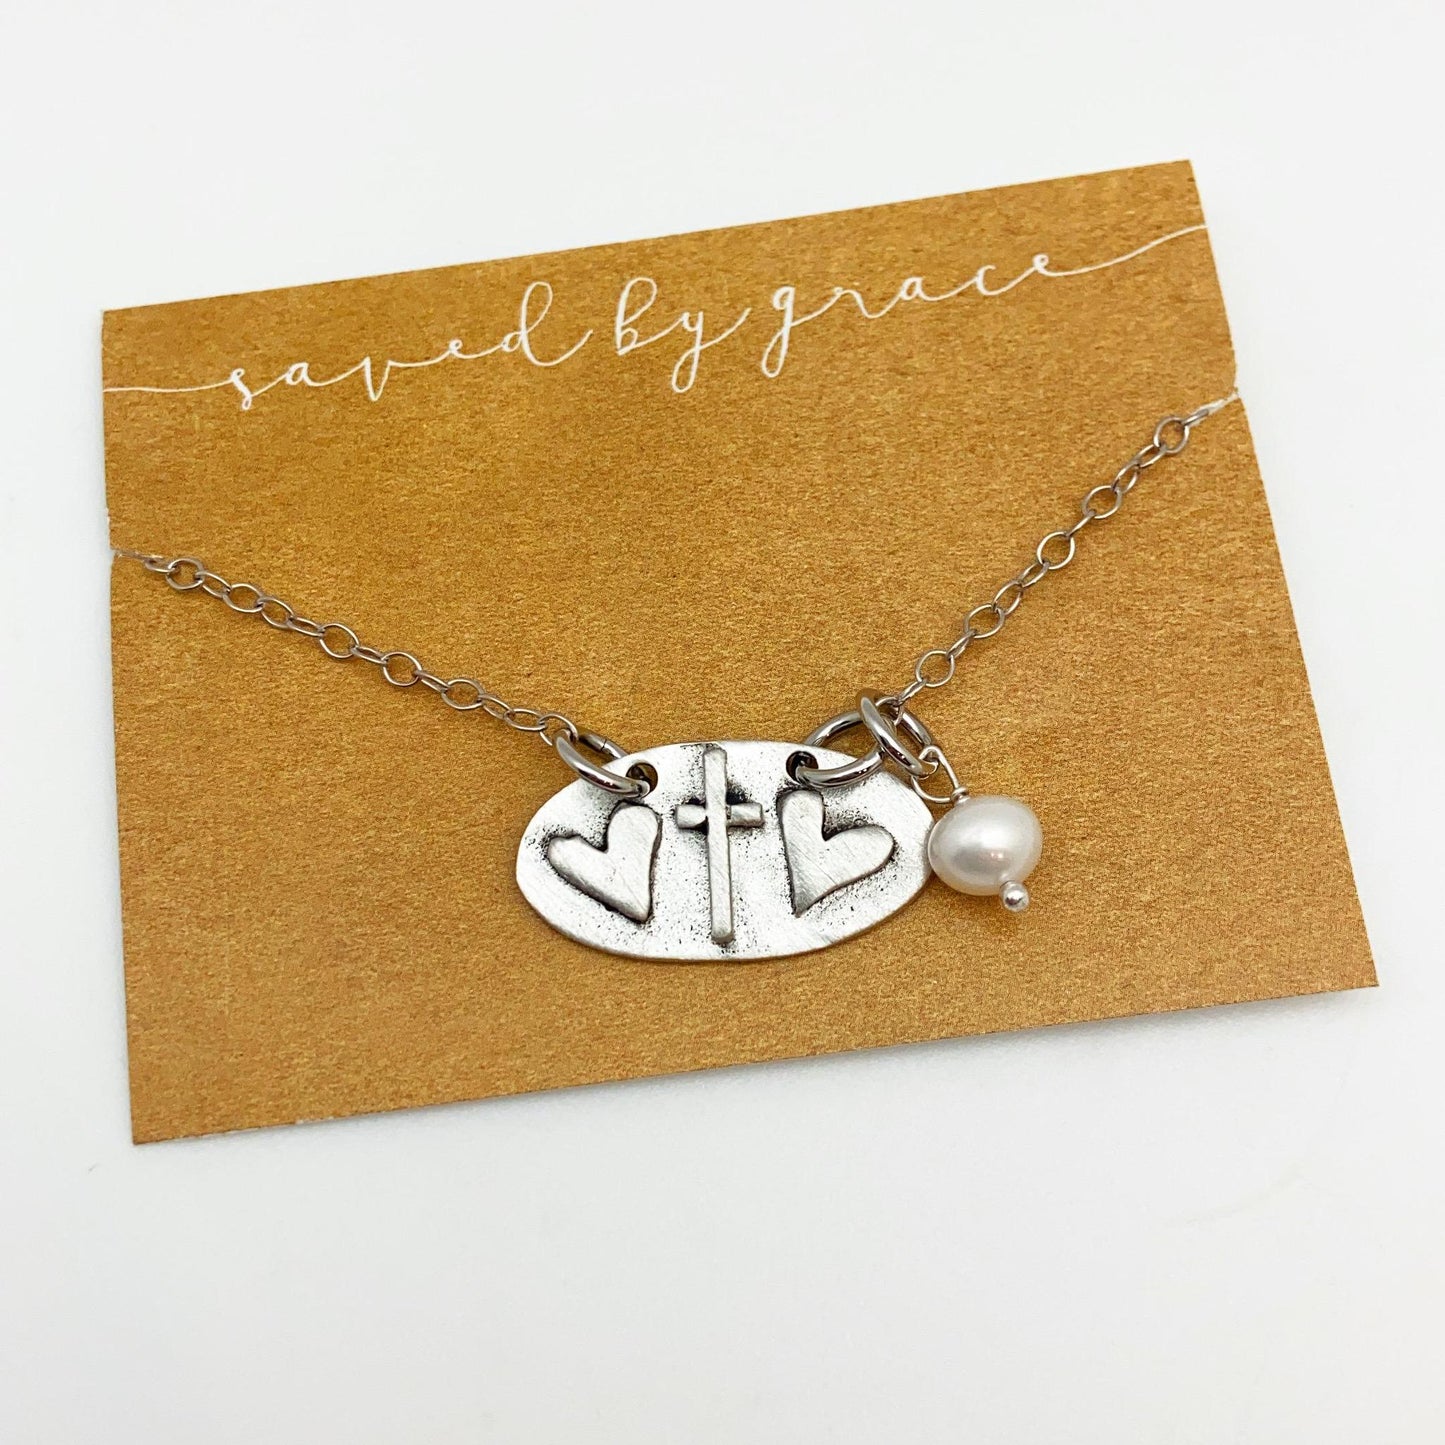 Necklace - "Saved By Grace" - Pewter